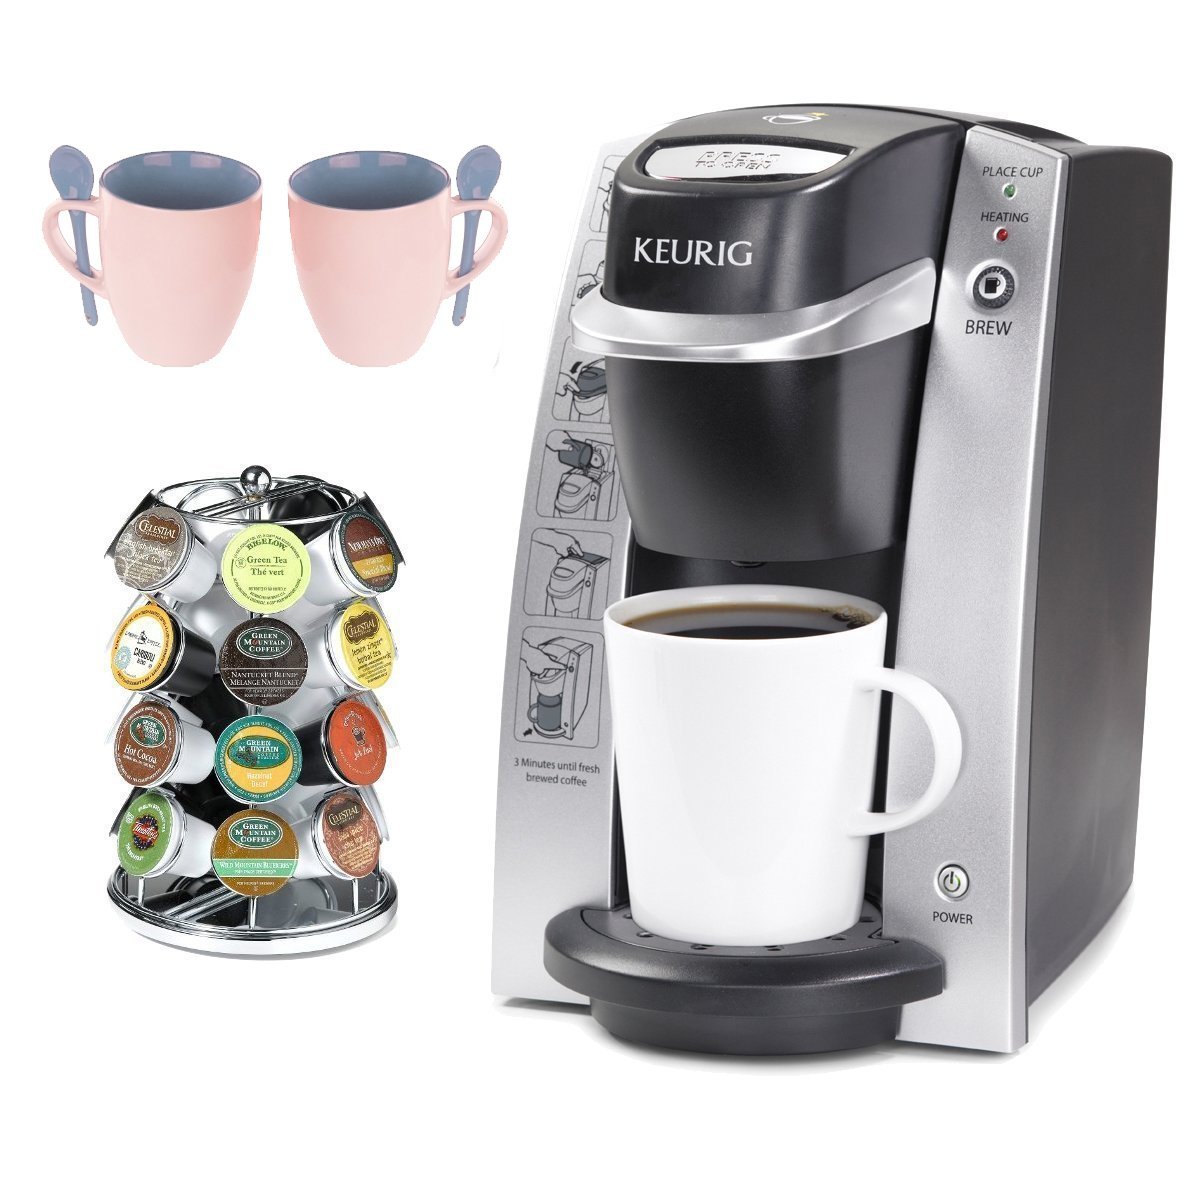 Keurig cup sizes pictures